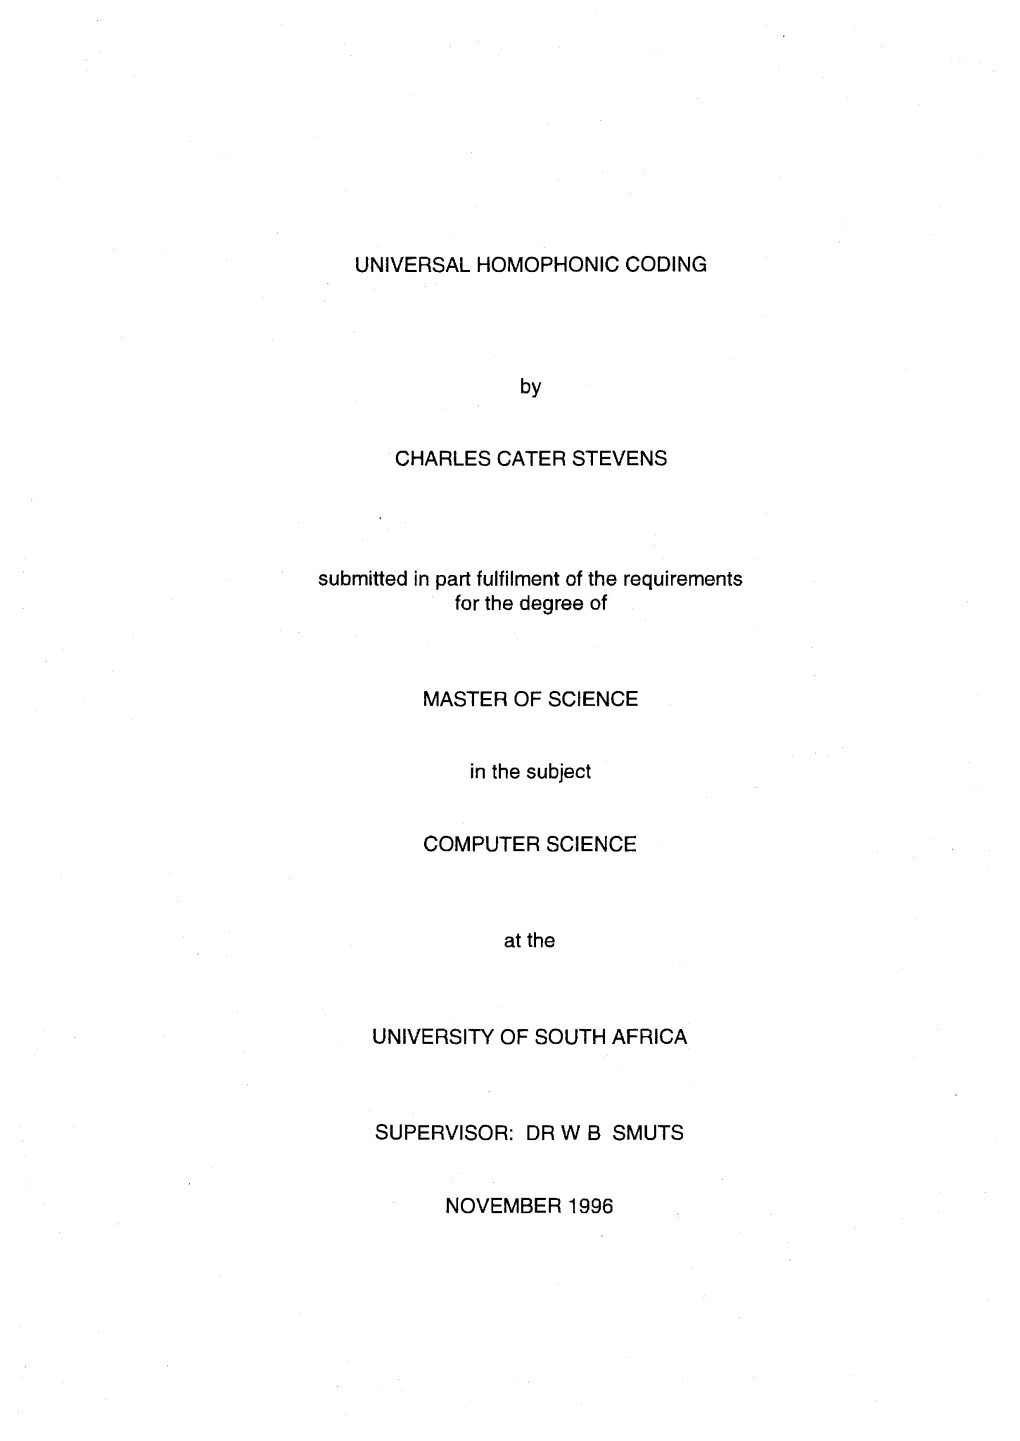 UNIVERSAL HOMOPHONIC CODING by CHARLES CATER STEVENS Submitted in Part Fulfilment of the Requirements for the Degree of MASTER O